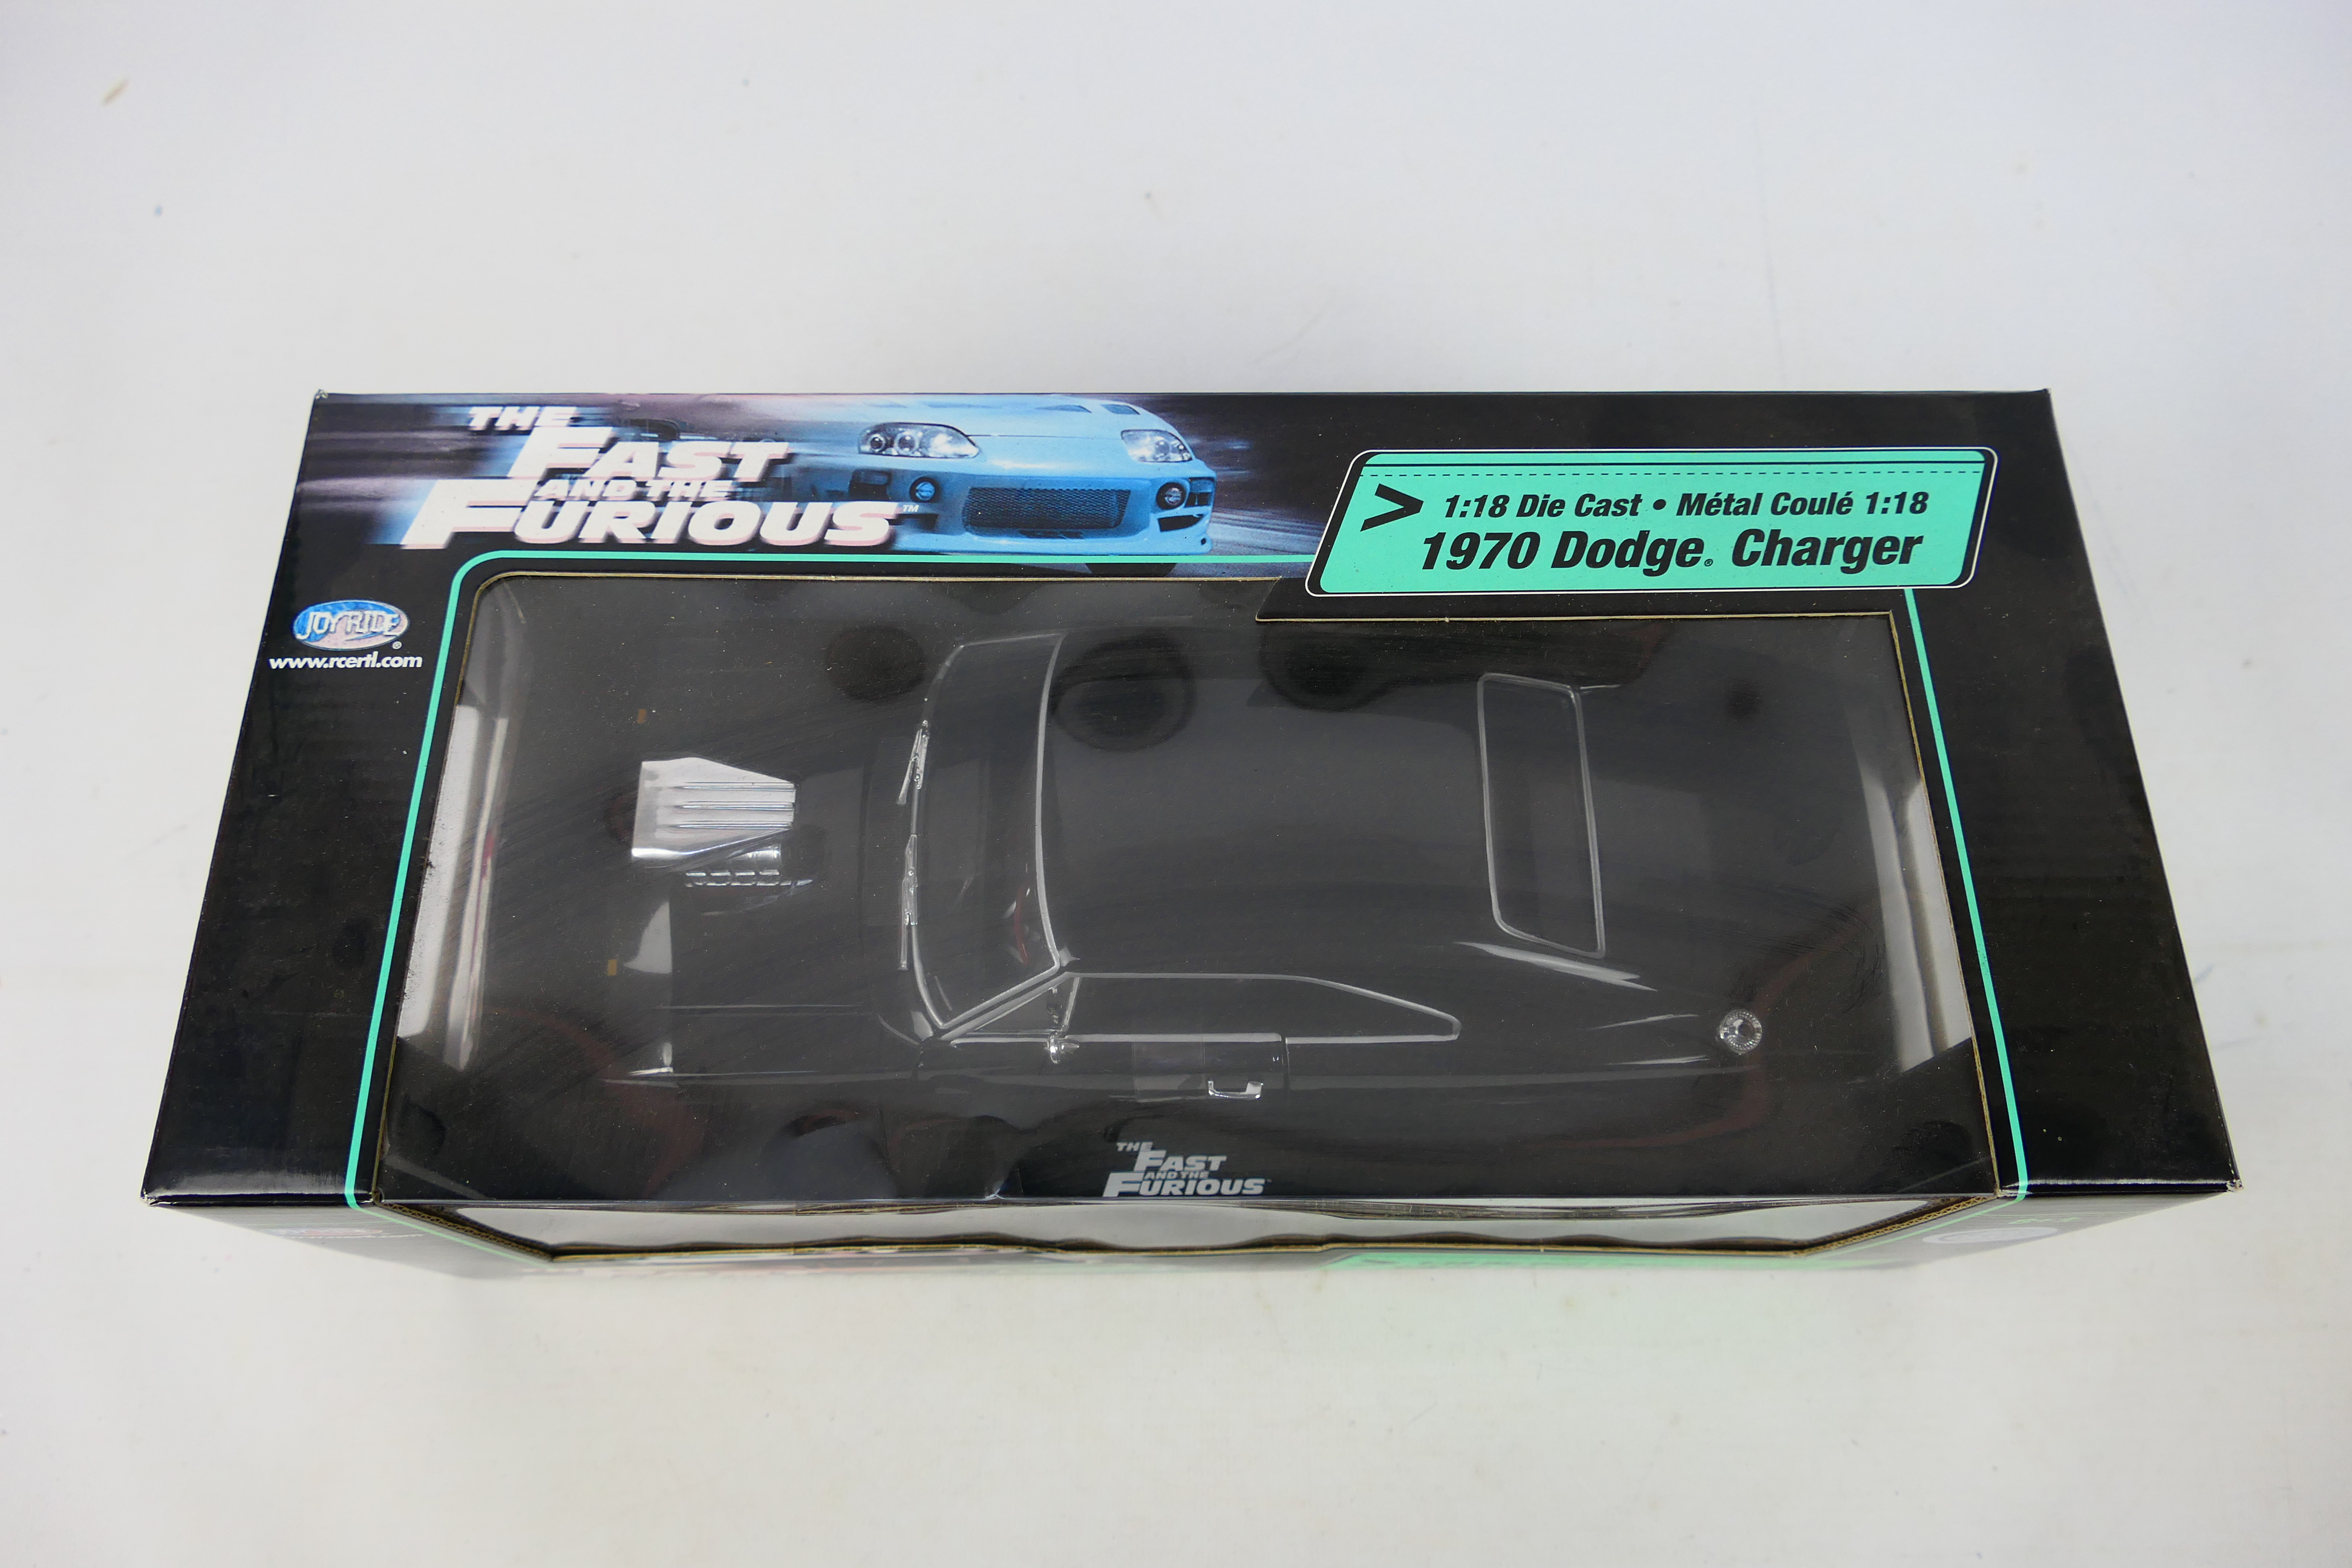 Joyride - A boxed Joyride #36973 1:18 scale 'The Fast & The Furious' 1970 Dodge Charger. - Image 4 of 4